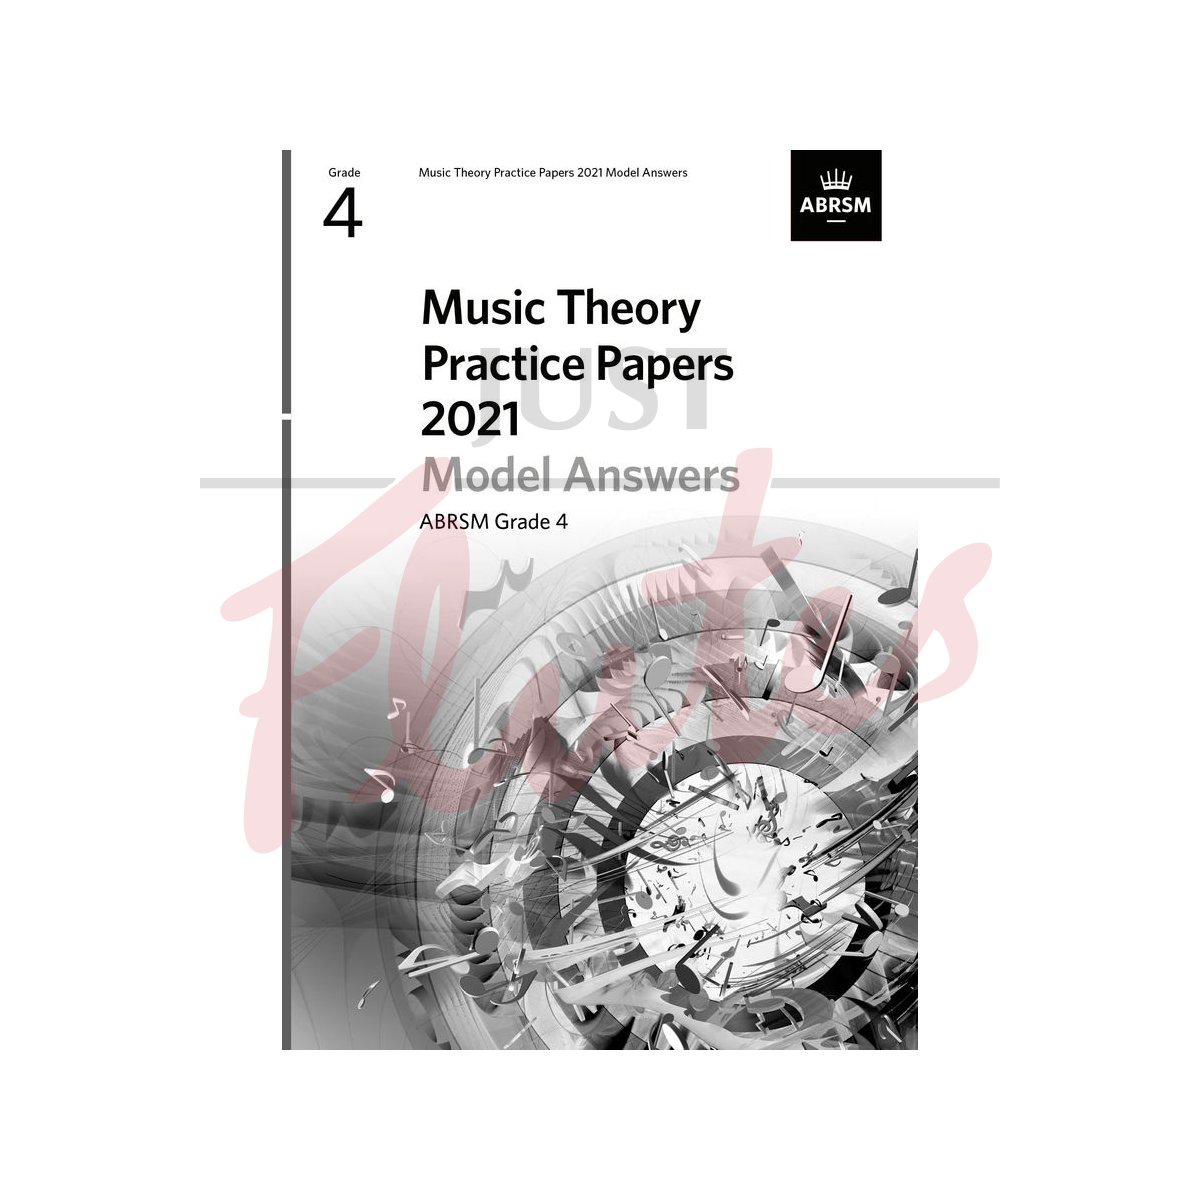 Music Theory Practice Papers 2021 Grade 4 - Model Answers